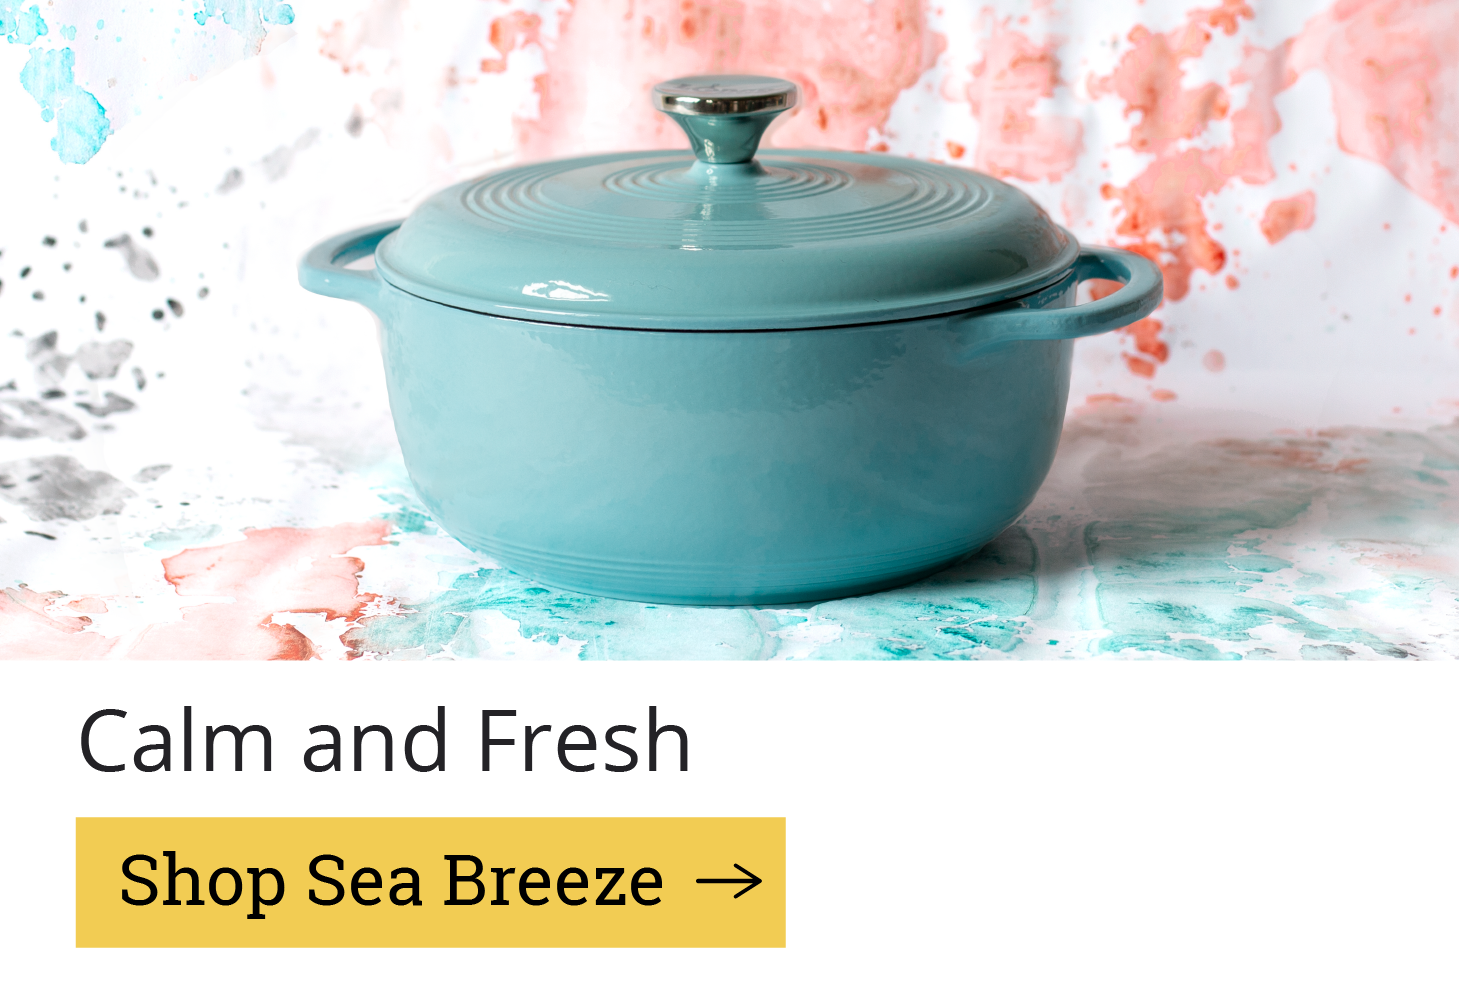 Cheerful and Sizzling [Shop Sea Breeze]